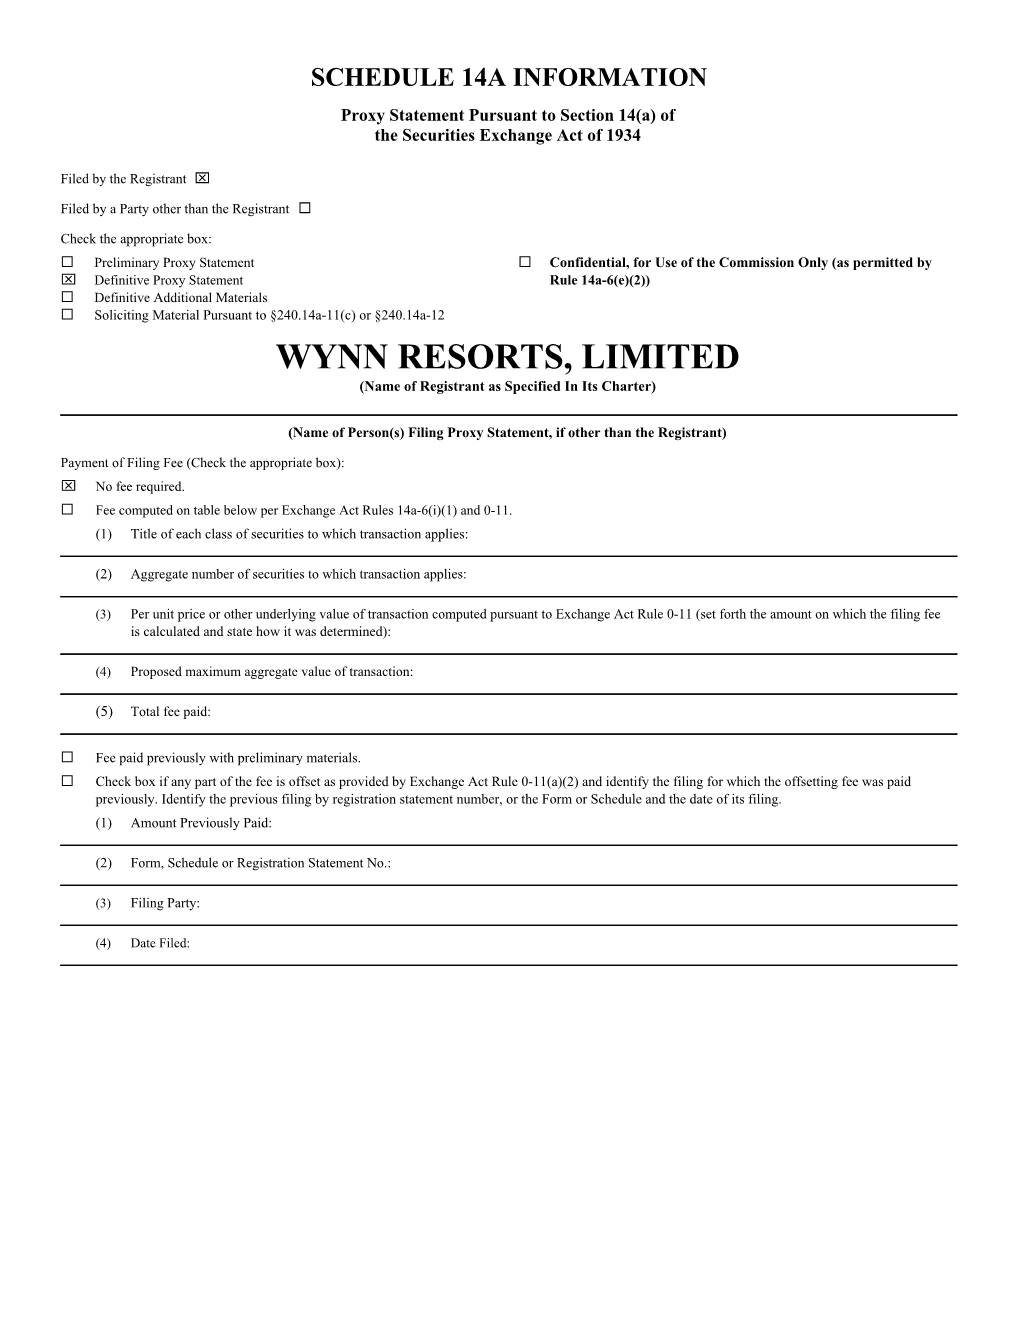 WYNN RESORTS, LIMITED (Name of Registrant As Specified in Its Charter)